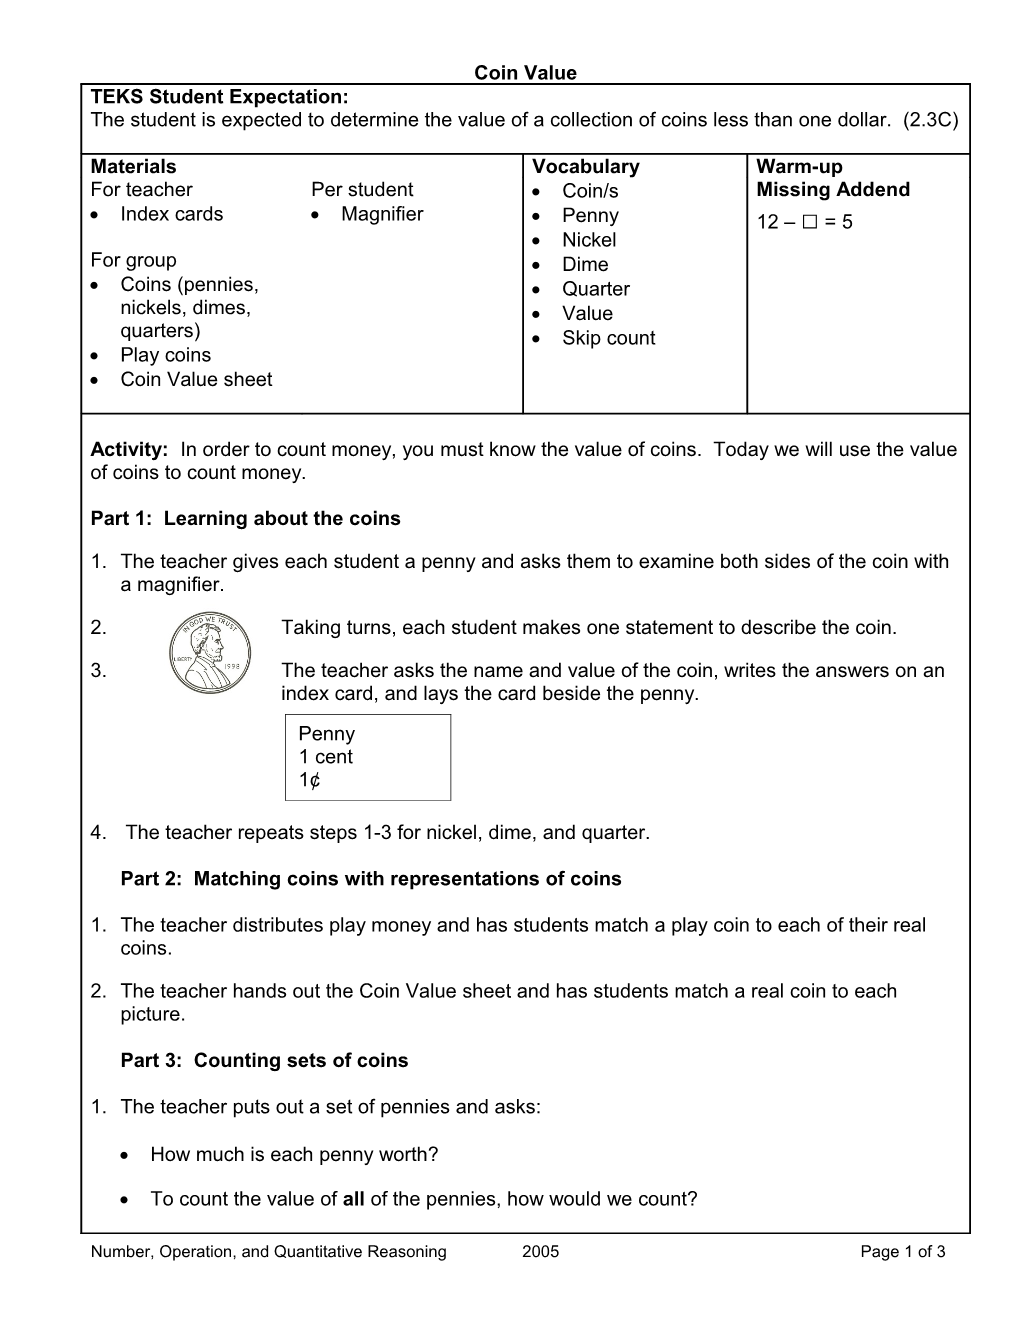 Number, Operation, and Quantitative Reasoning 2005 Page 1 of 3